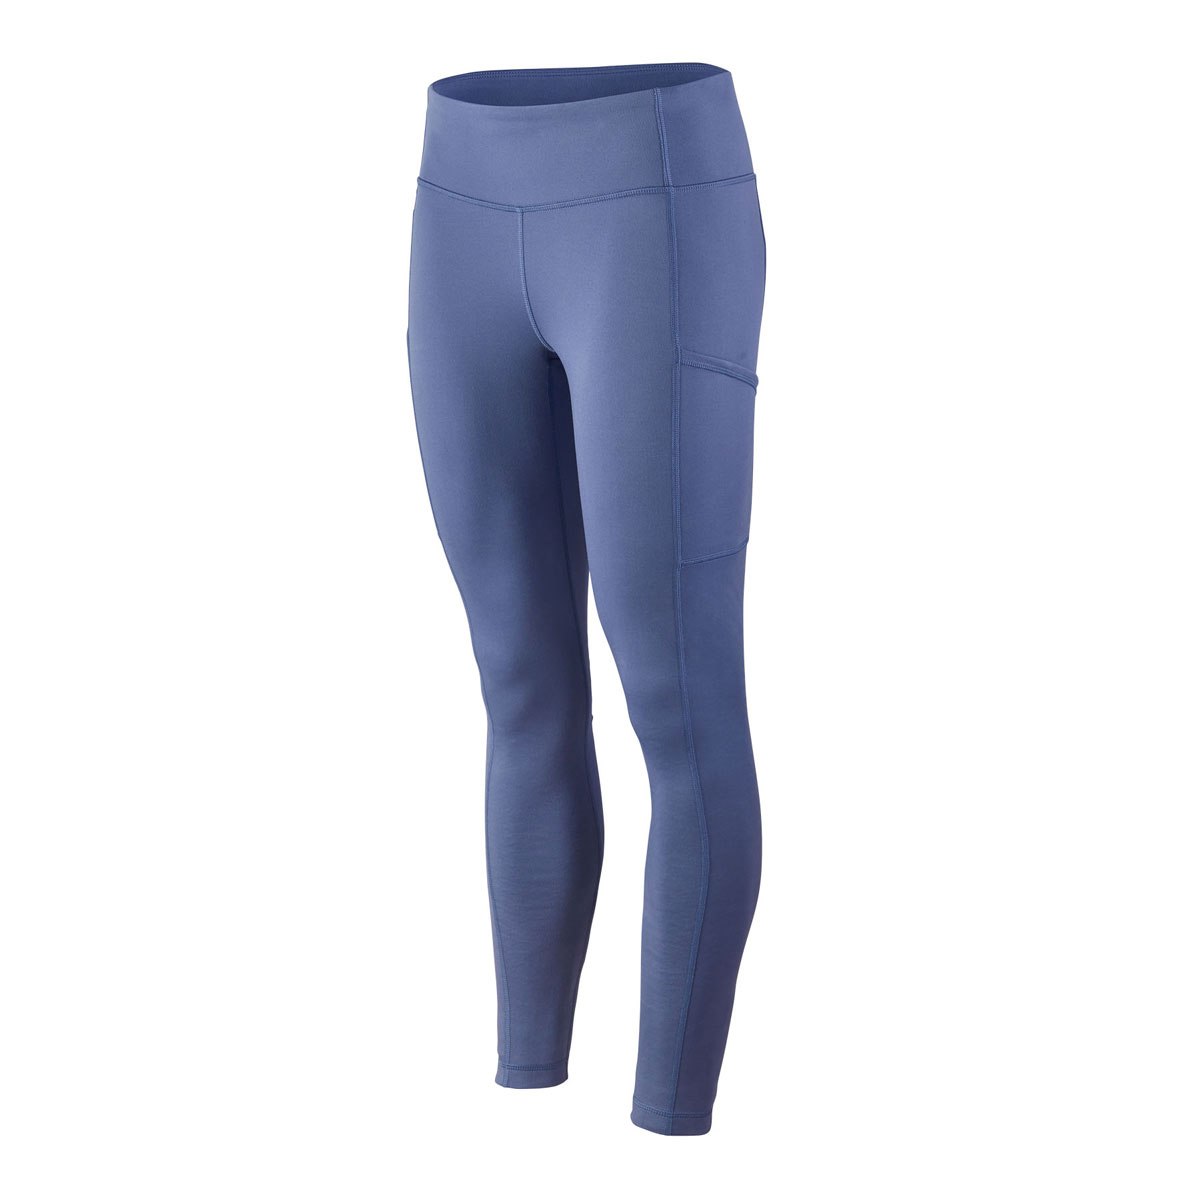 Patagonia Women's Pack Out Tights - Current Blue